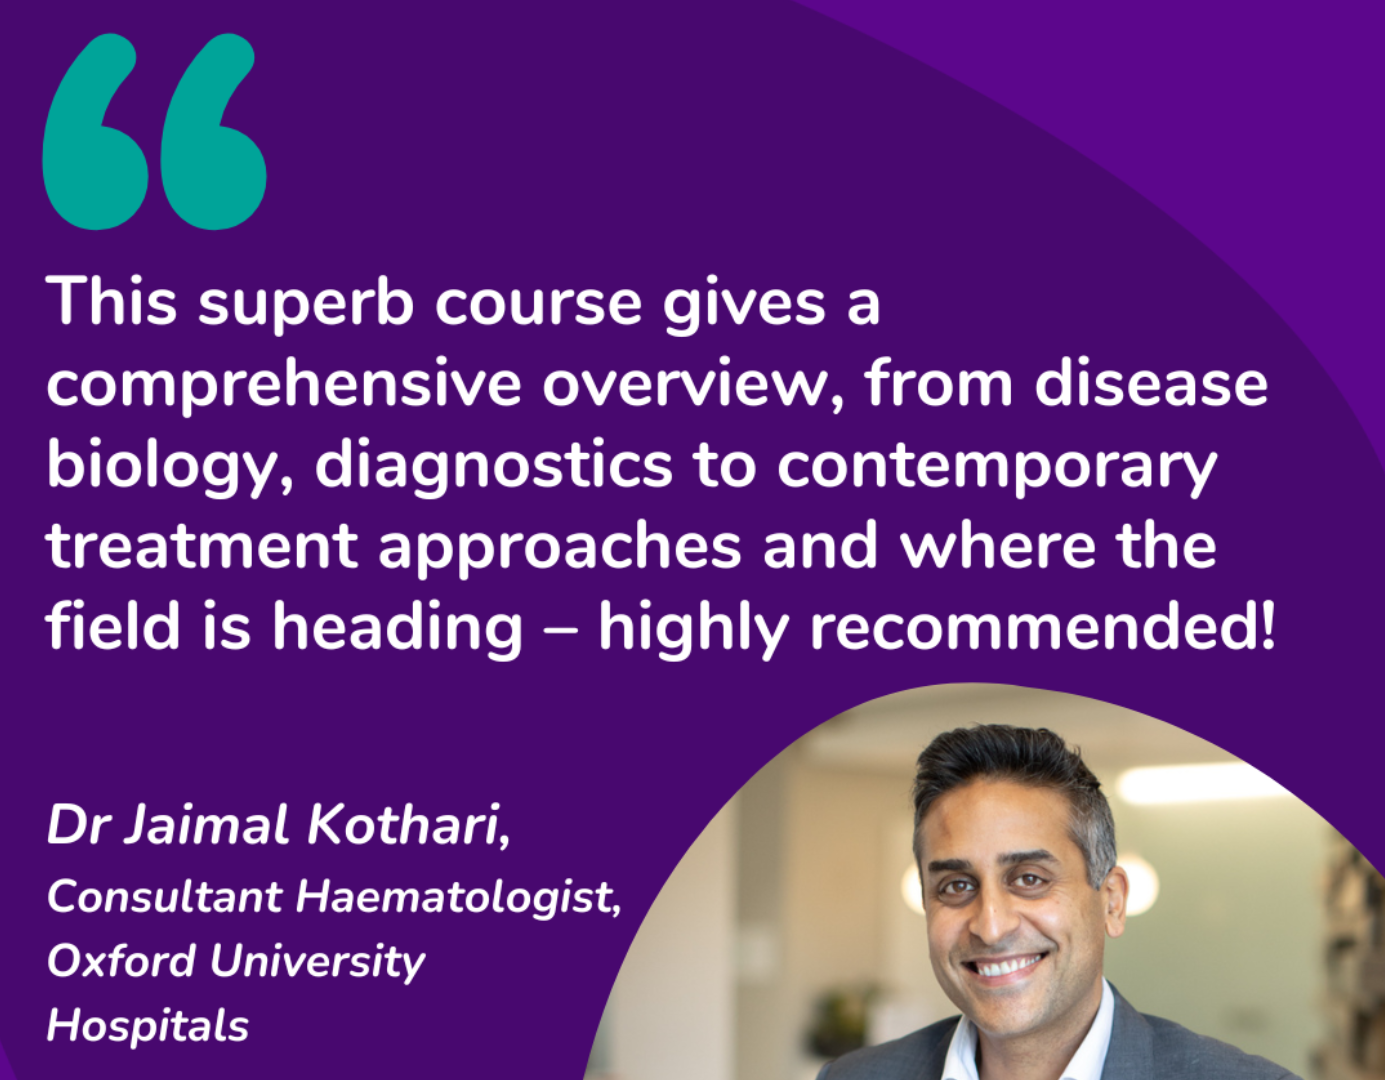 Quote from Jaimal Kothari promoting the lymphoma management course